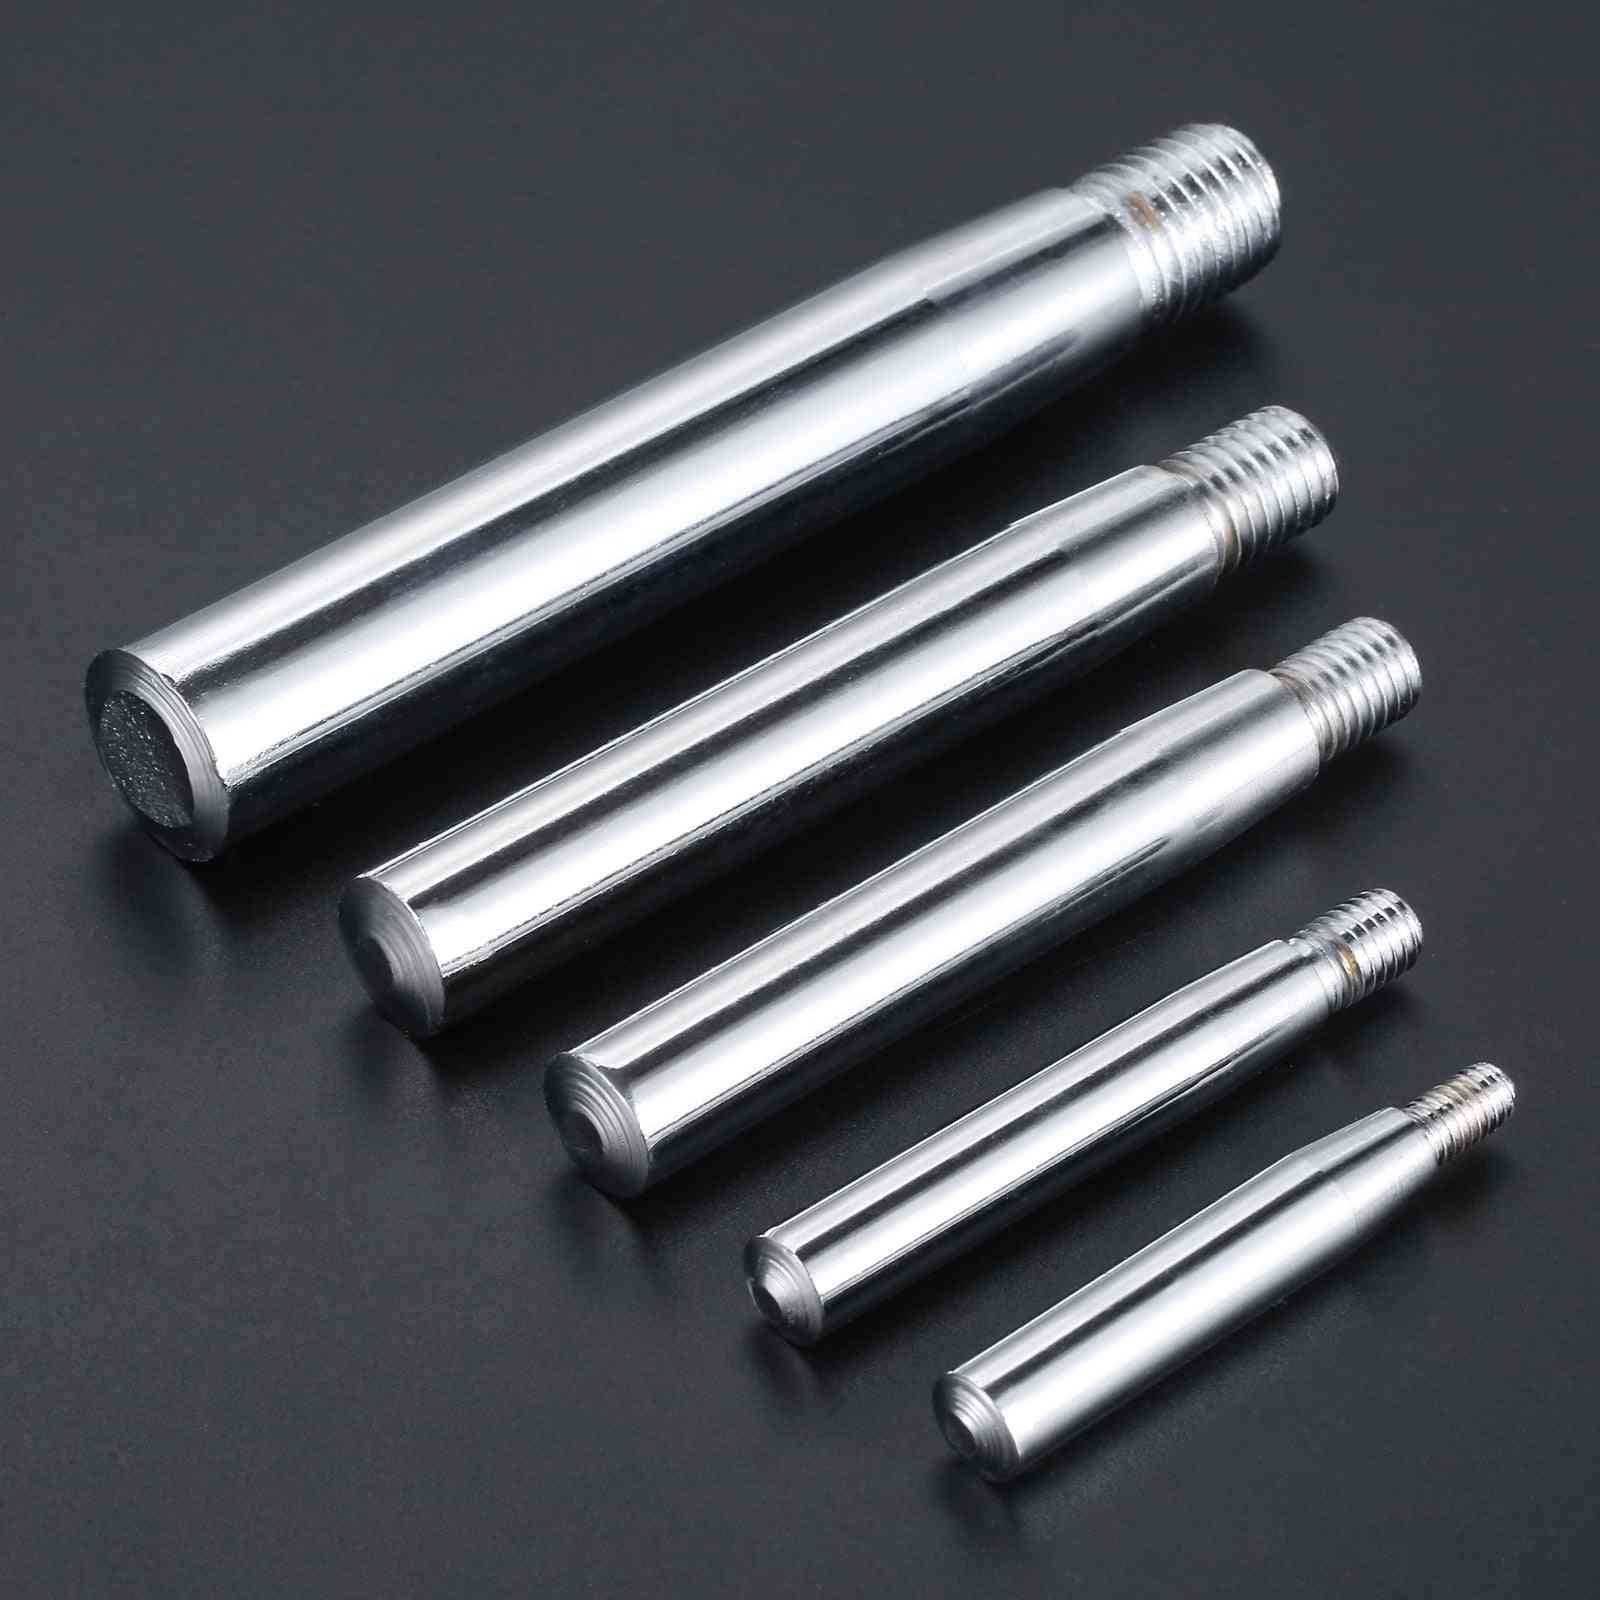 Metal Straight Revolving Handle Grips For Milling Machine